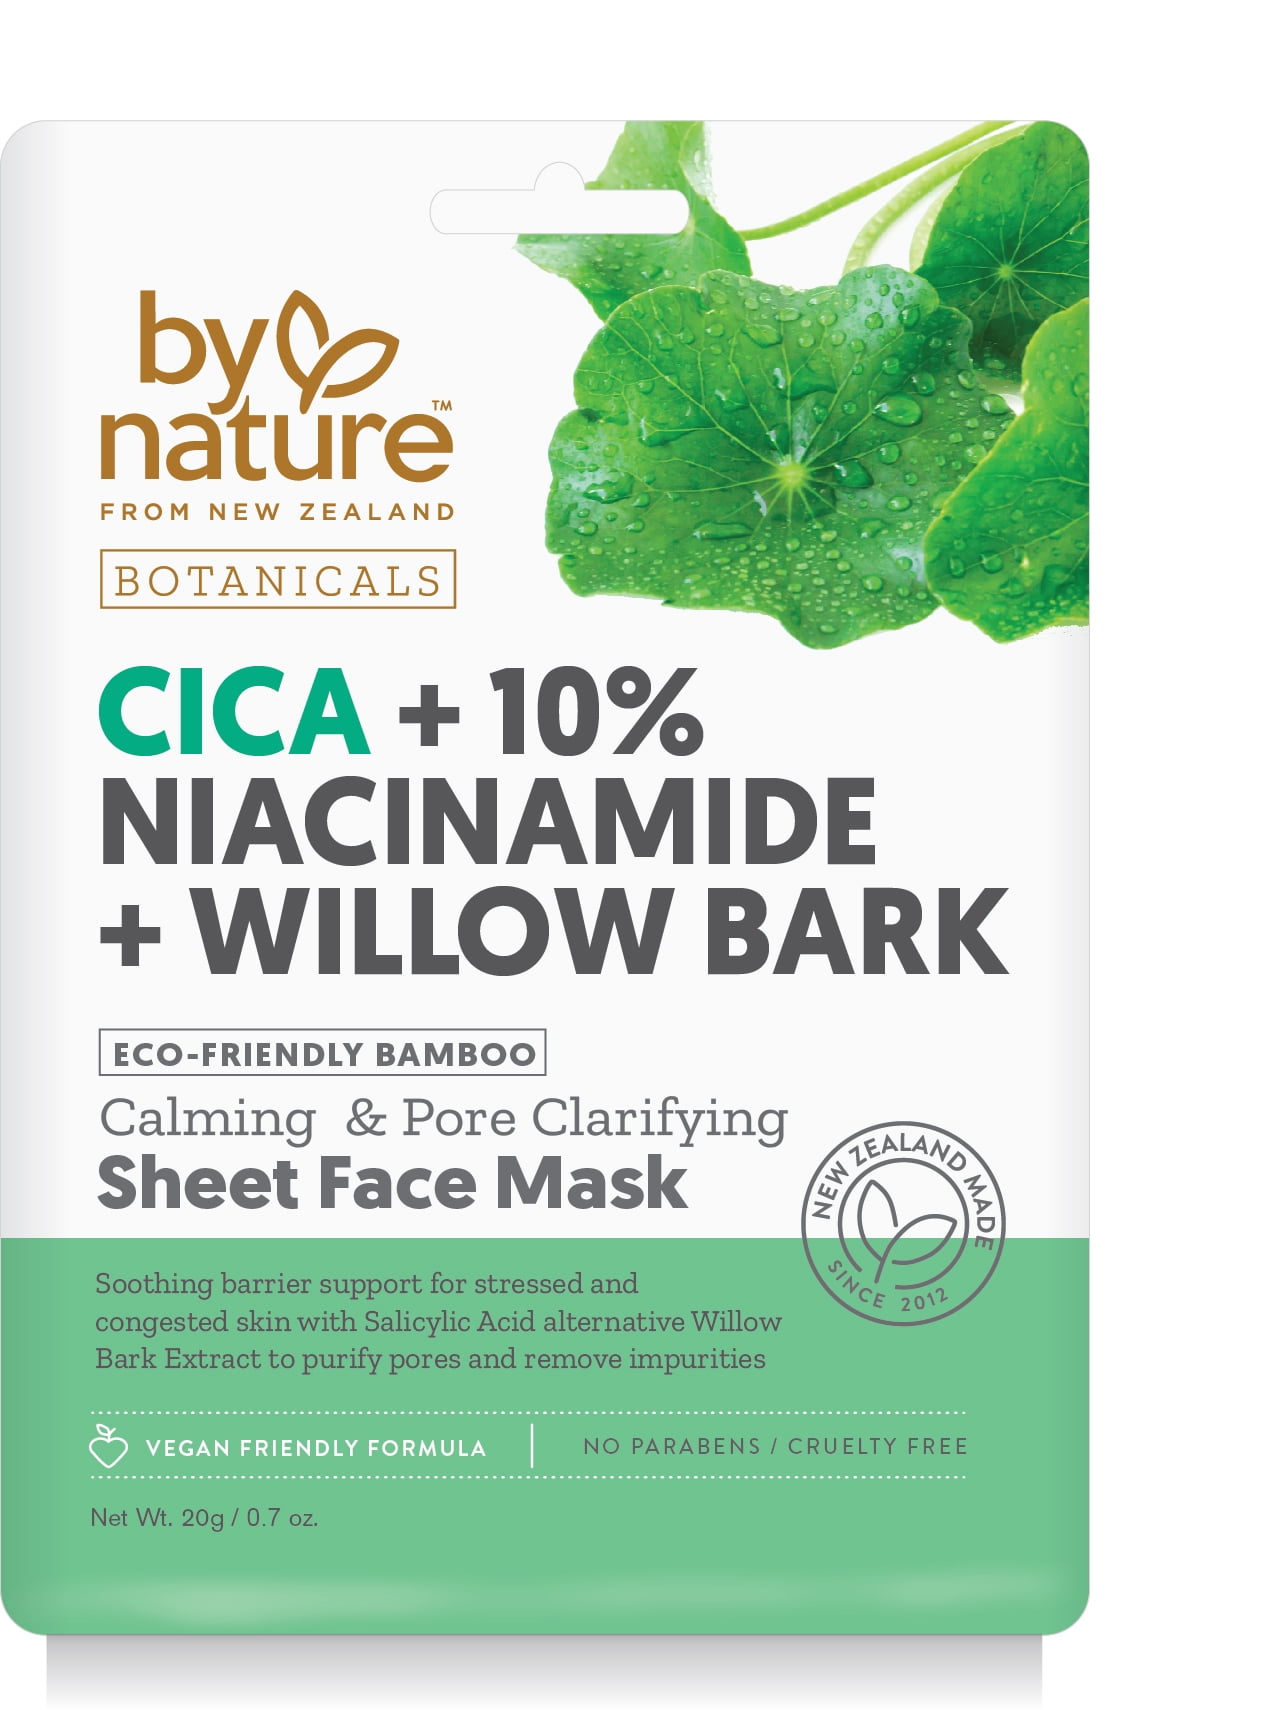 By Nature from New Zealand Cica + 10% Niacinamide + Willow Bark Calming